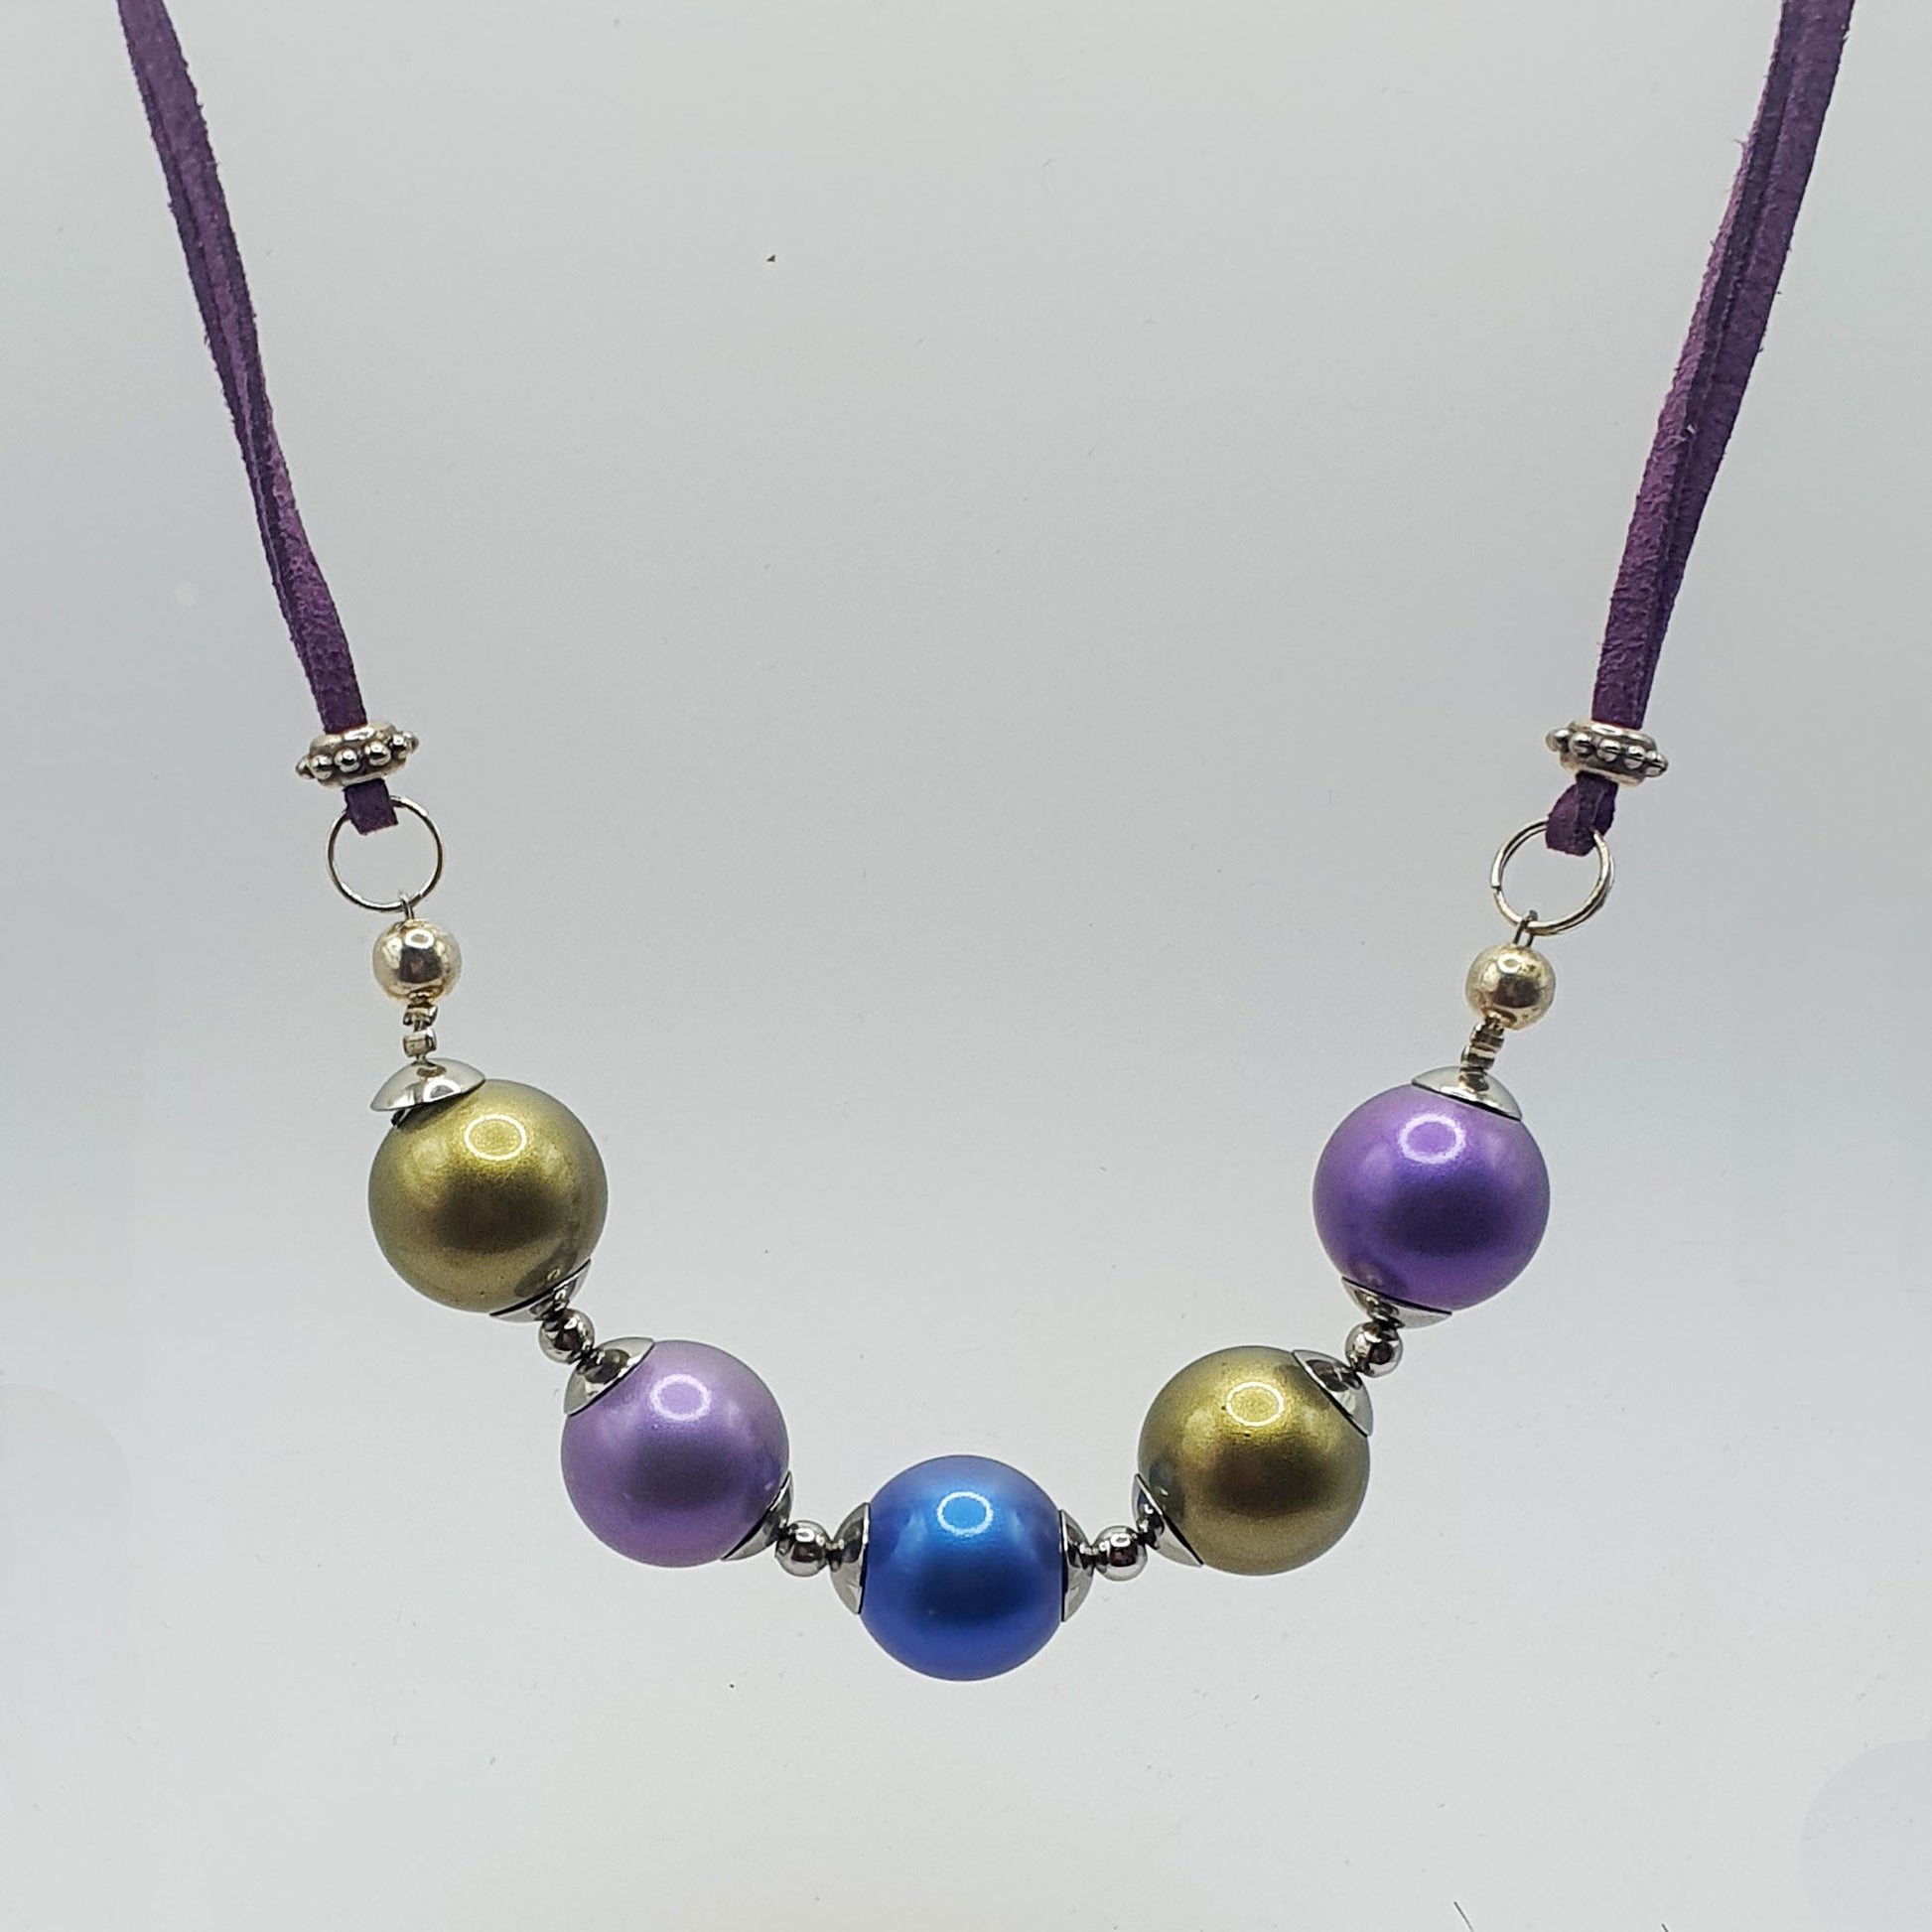 Glass pearl crescent necklace in green, blue and purple tones